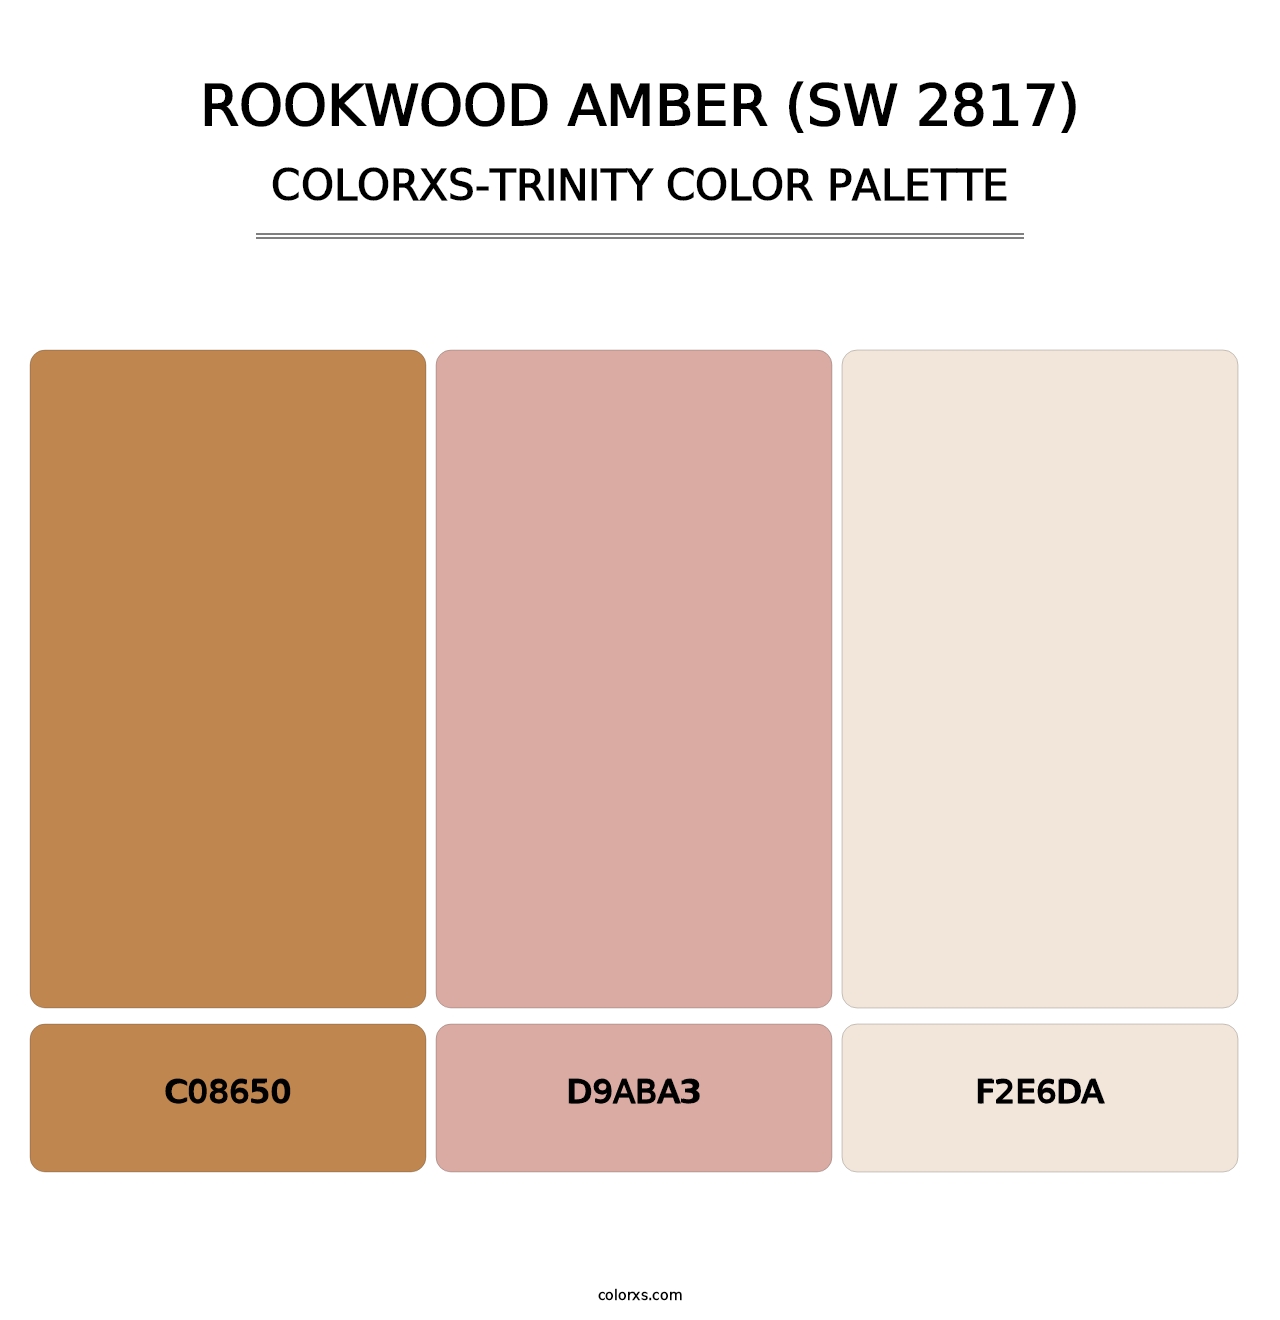 Rookwood Amber (SW 2817) - Colorxs Trinity Palette